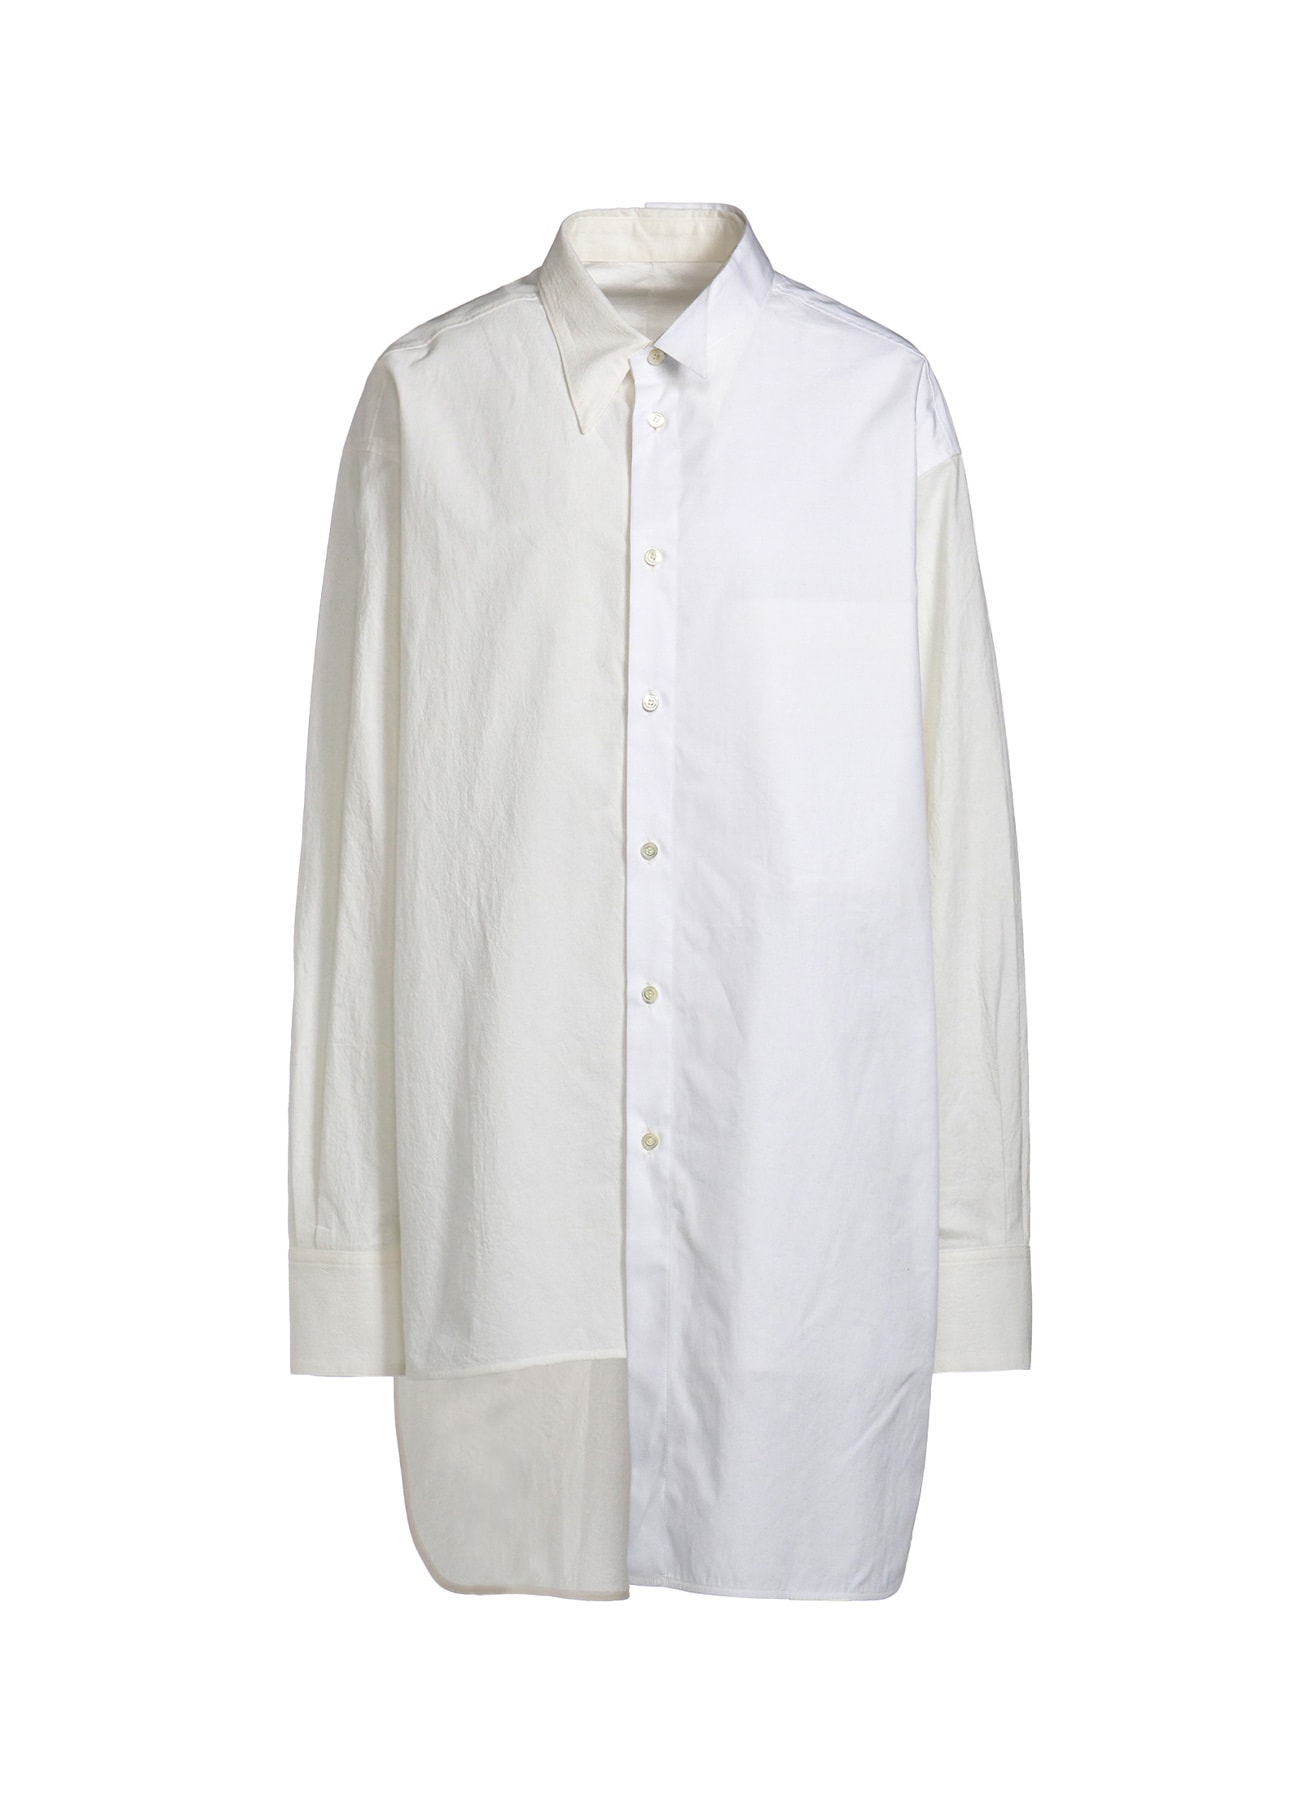 HIGH TWISTED COTTON DOUBLE LAYERED WING COLLAR SHIRT